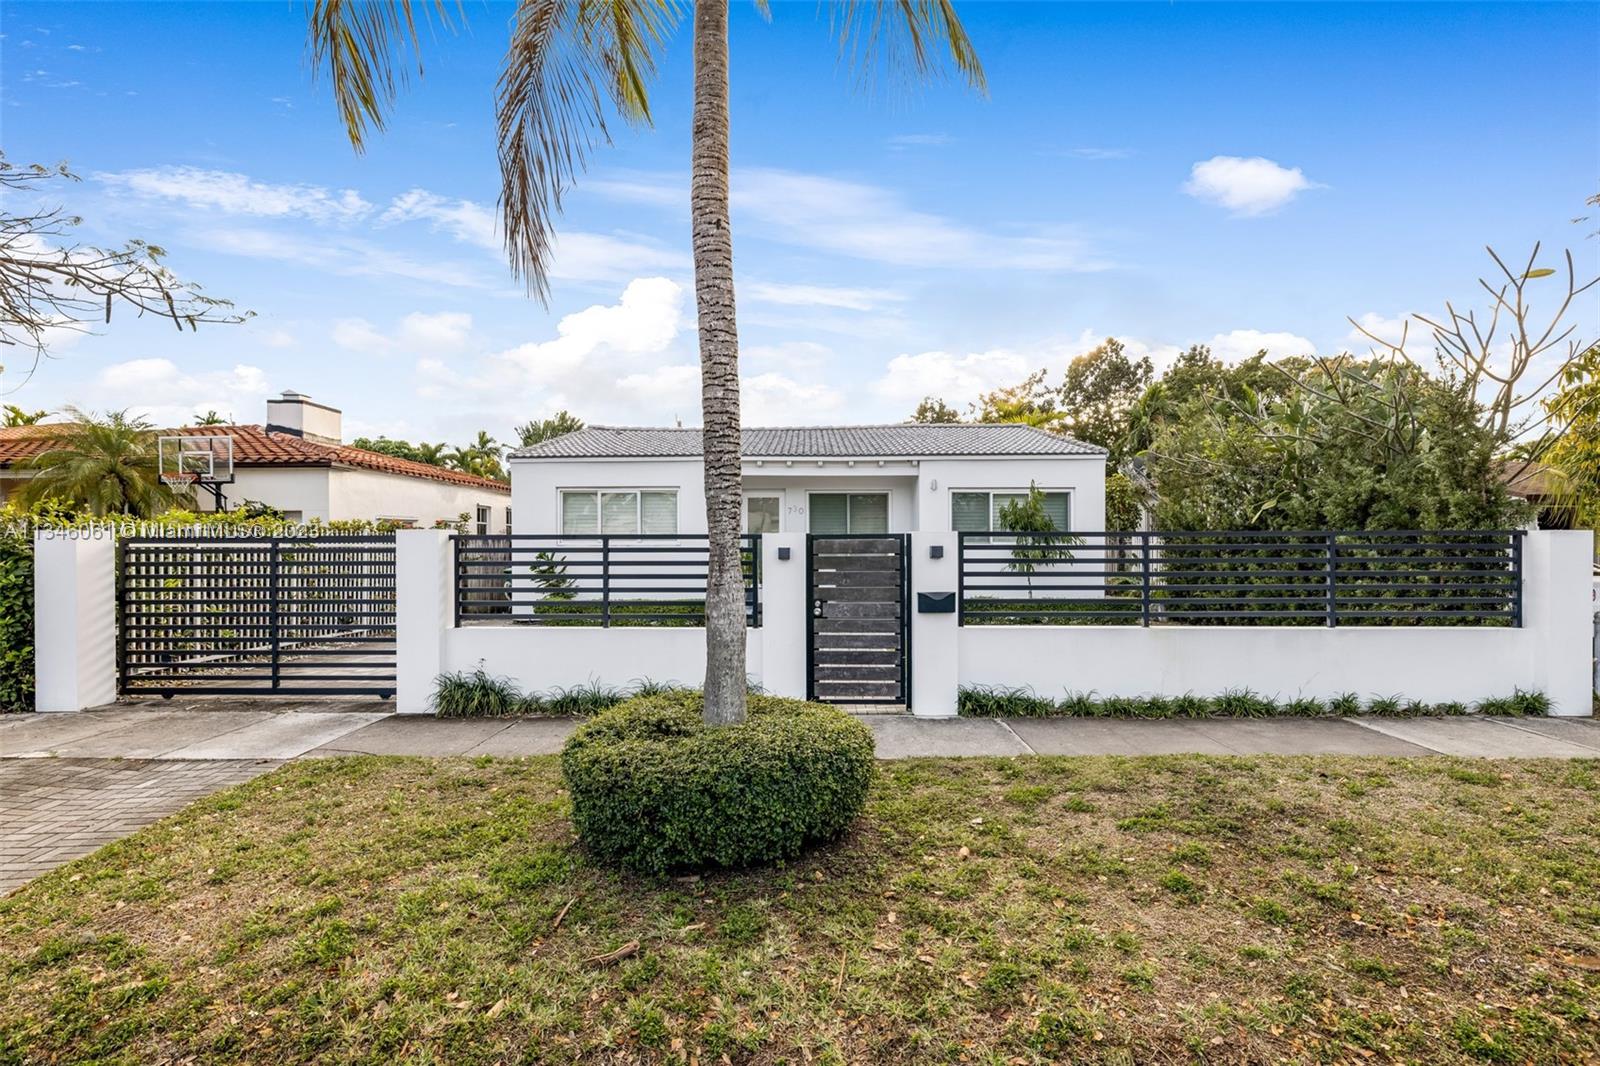 Absolutely exquisite,  totally renovated home located in the Roads.  This gorgeous residence offers 3 bedrooms, 3 baths with top of the line finishes throughout, with a patio and pool. Upscale Roads neighborhood blocks away from Brickell and Downtown. Tenant occupied until May.